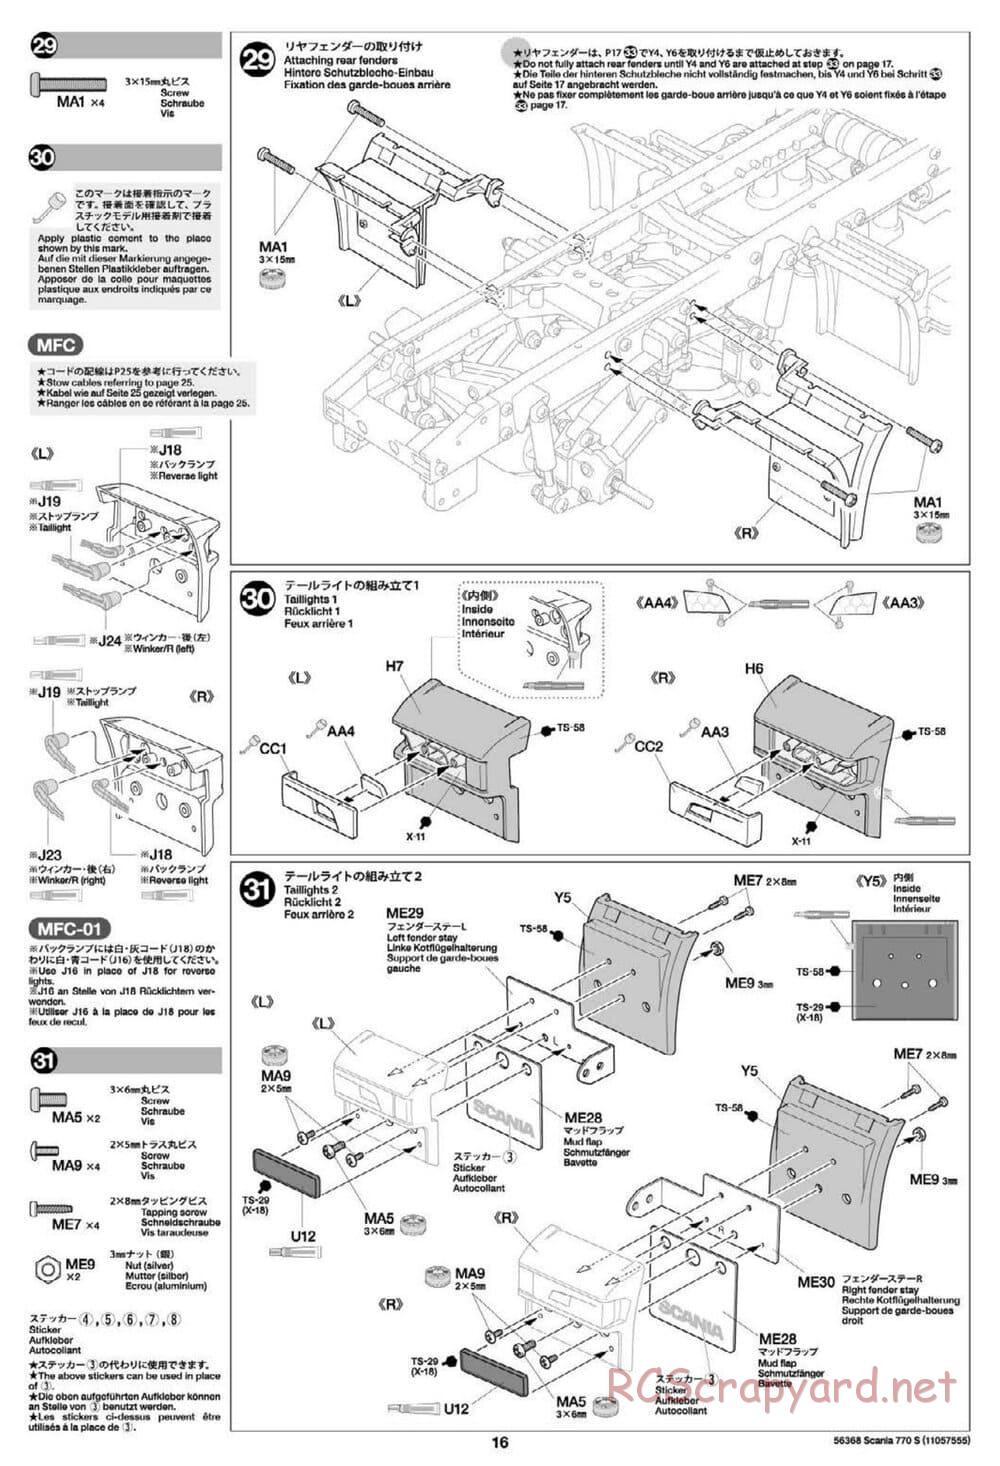 Tamiya - Scania 770S 6x4 Tractor Truck Chassis - Manual - Page 16